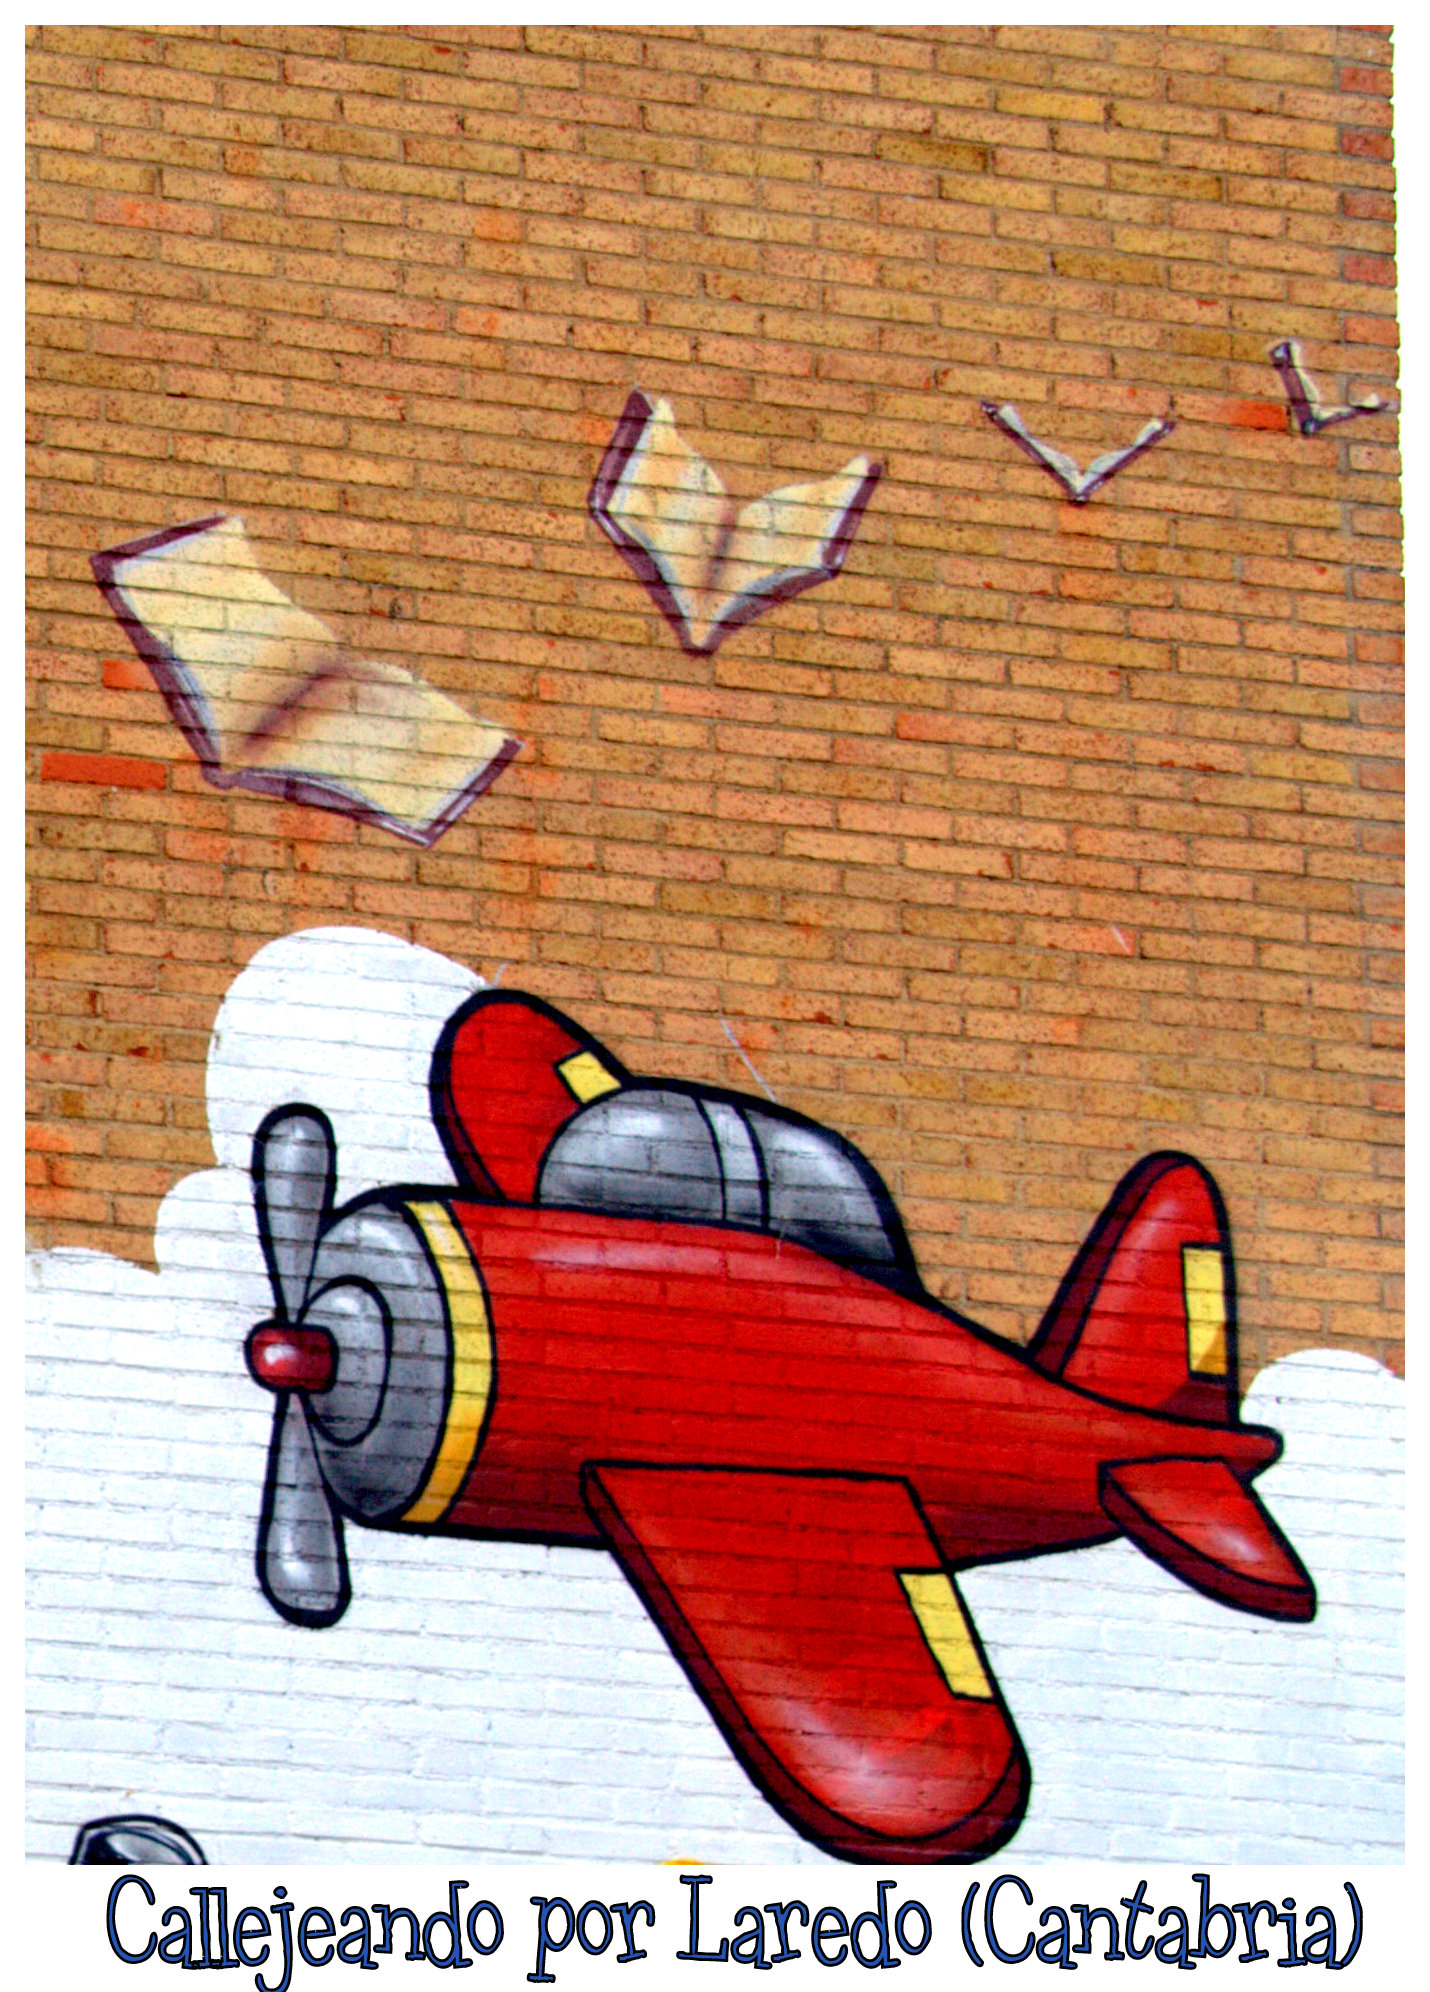 graffiti of a red plane in front of a brick wall